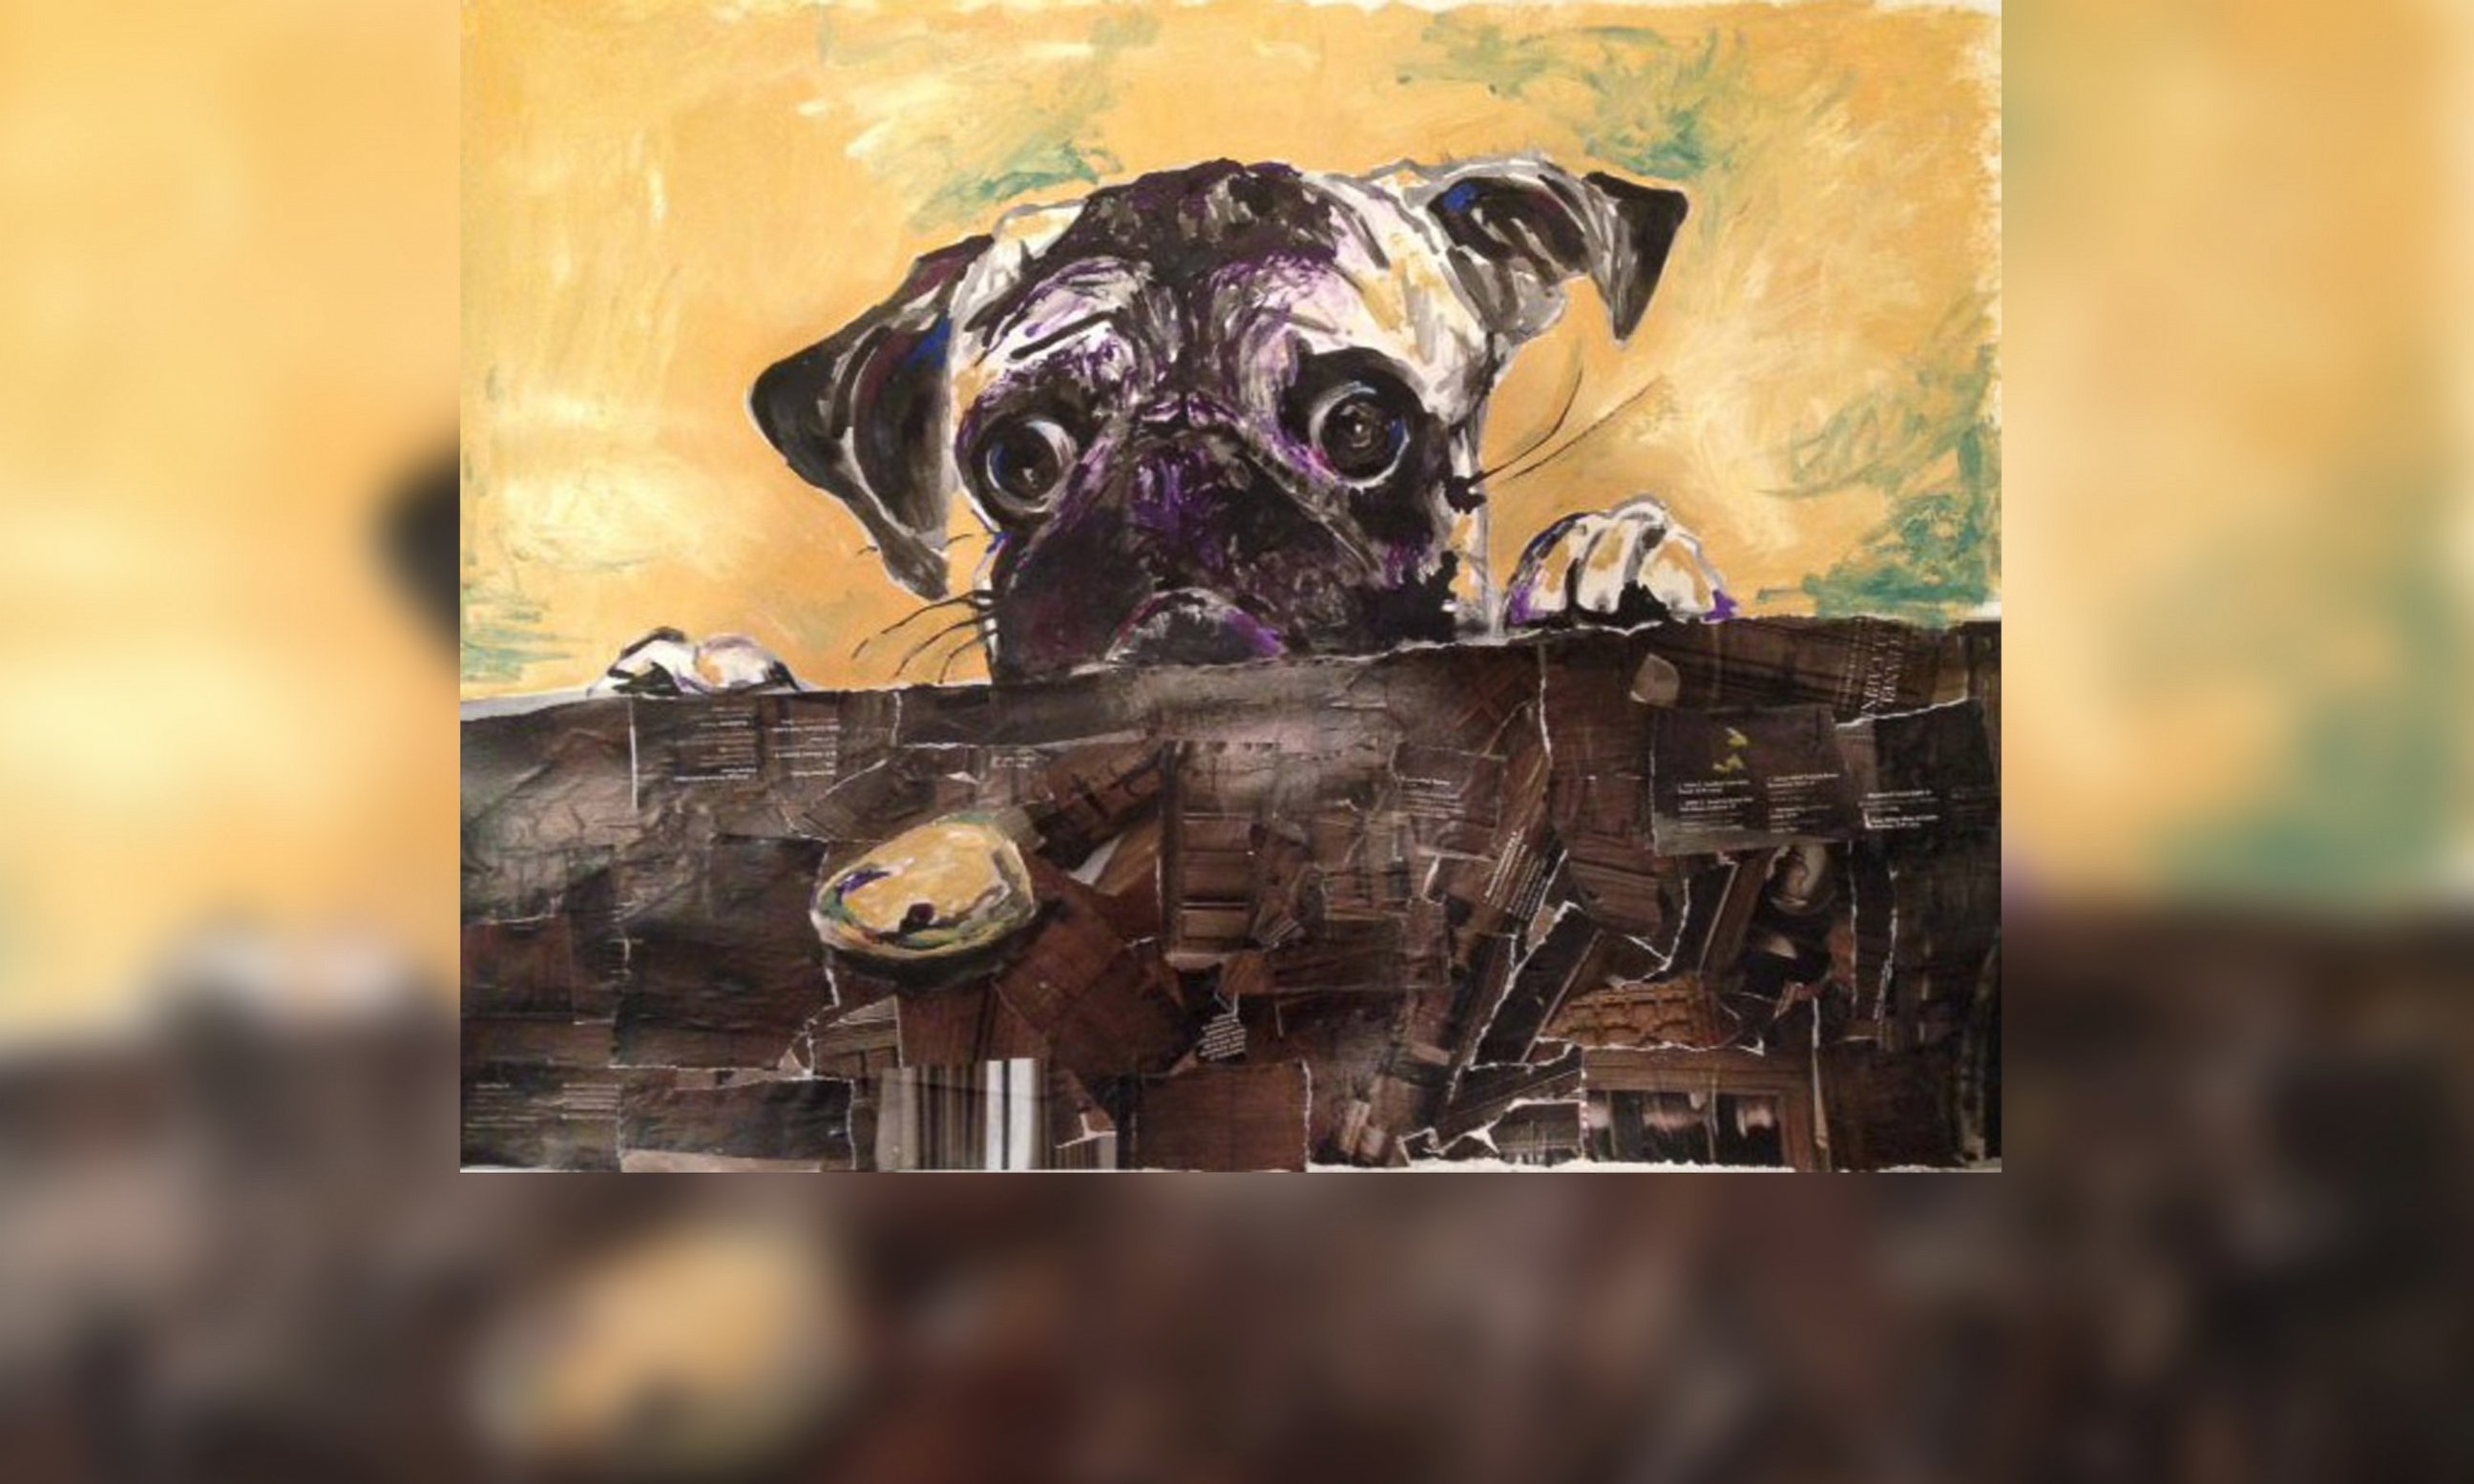 PHOTO: The collage of a pug resting its head on the table is named "Pug Appeal."